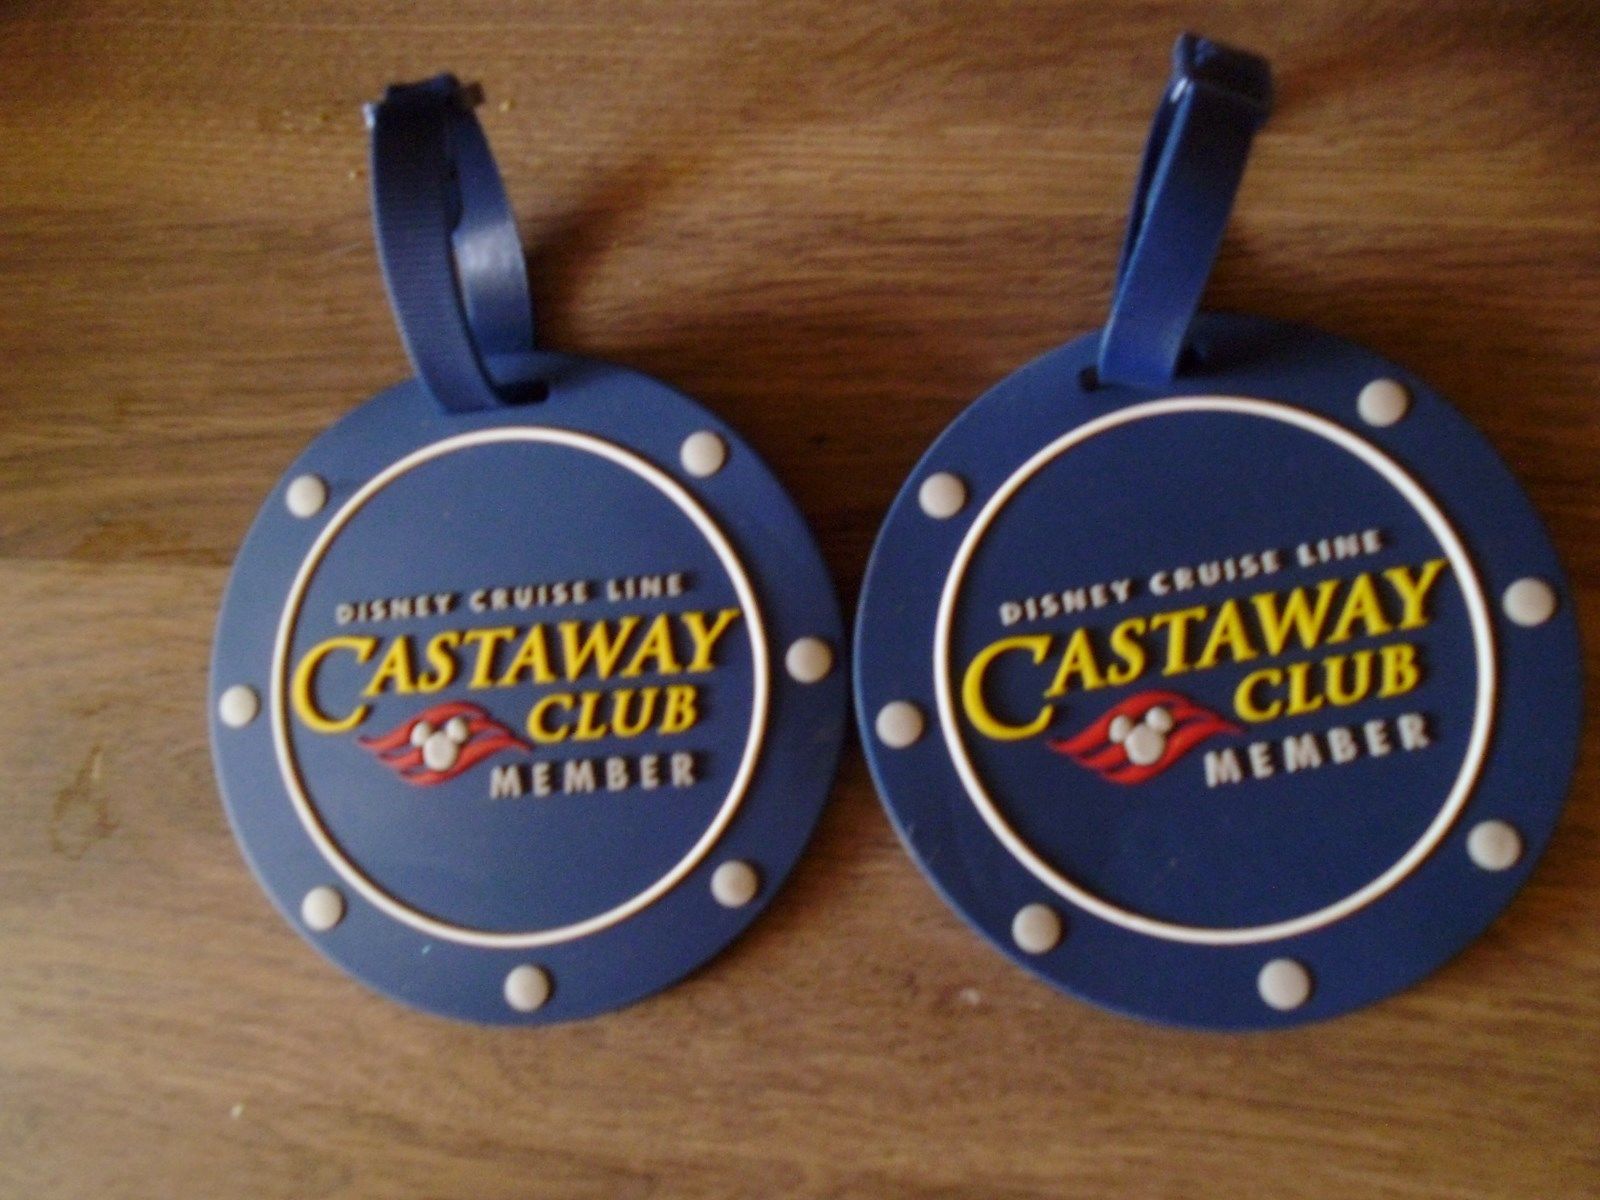 Disney Cruise Line Castaway Club Lot of 2 Luggage Tags New -- Antique ...